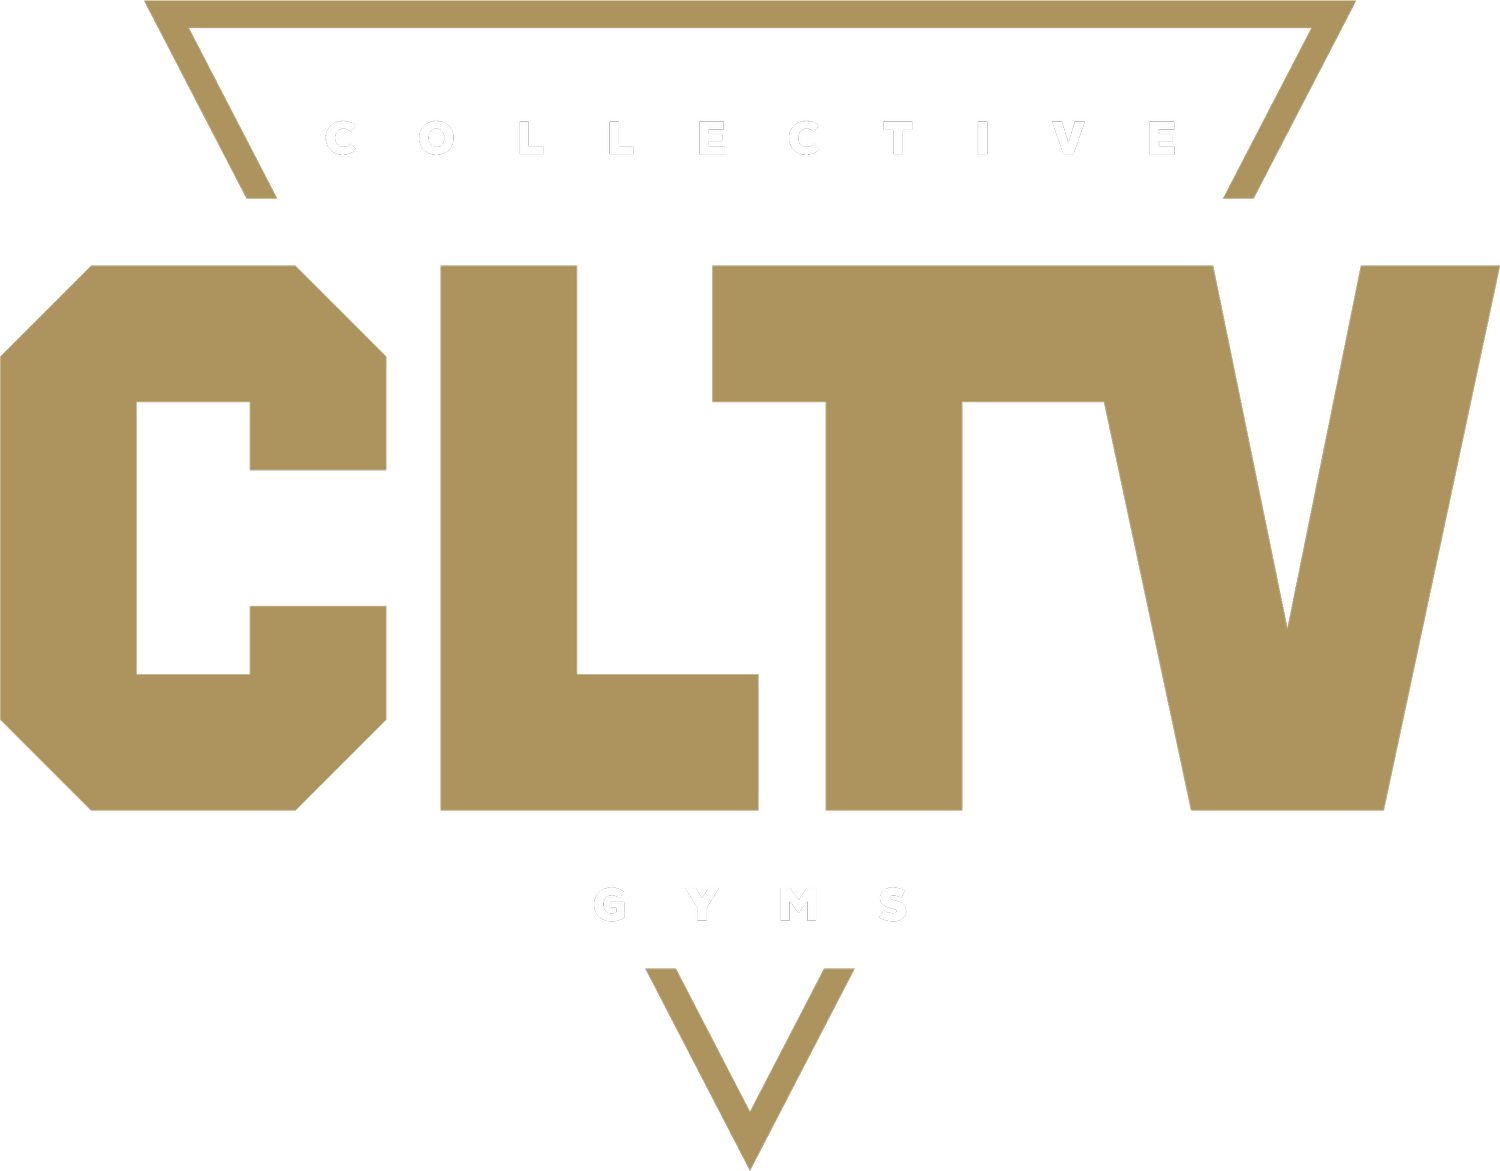 CLTV Gyms